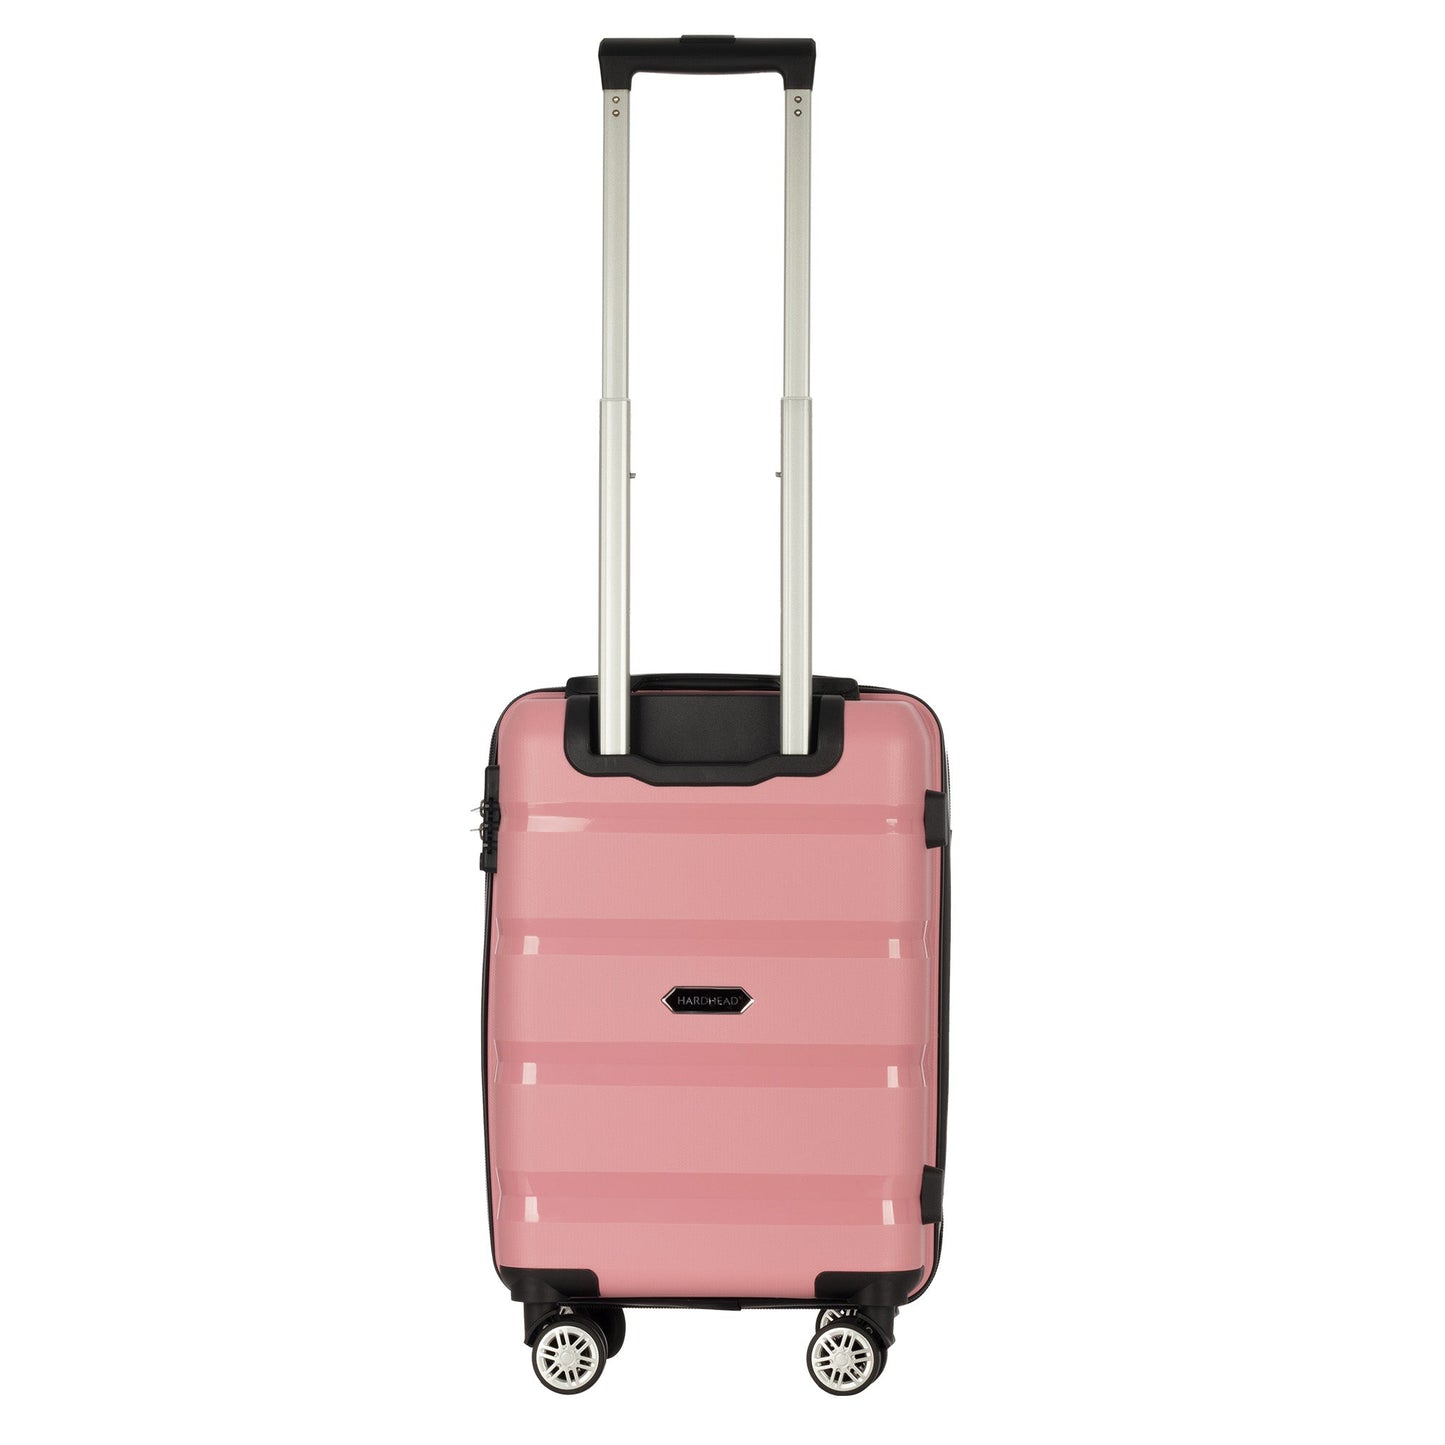 Ian Collection Pink Luggage (20") Suitcase Lock Spinner Hardshell